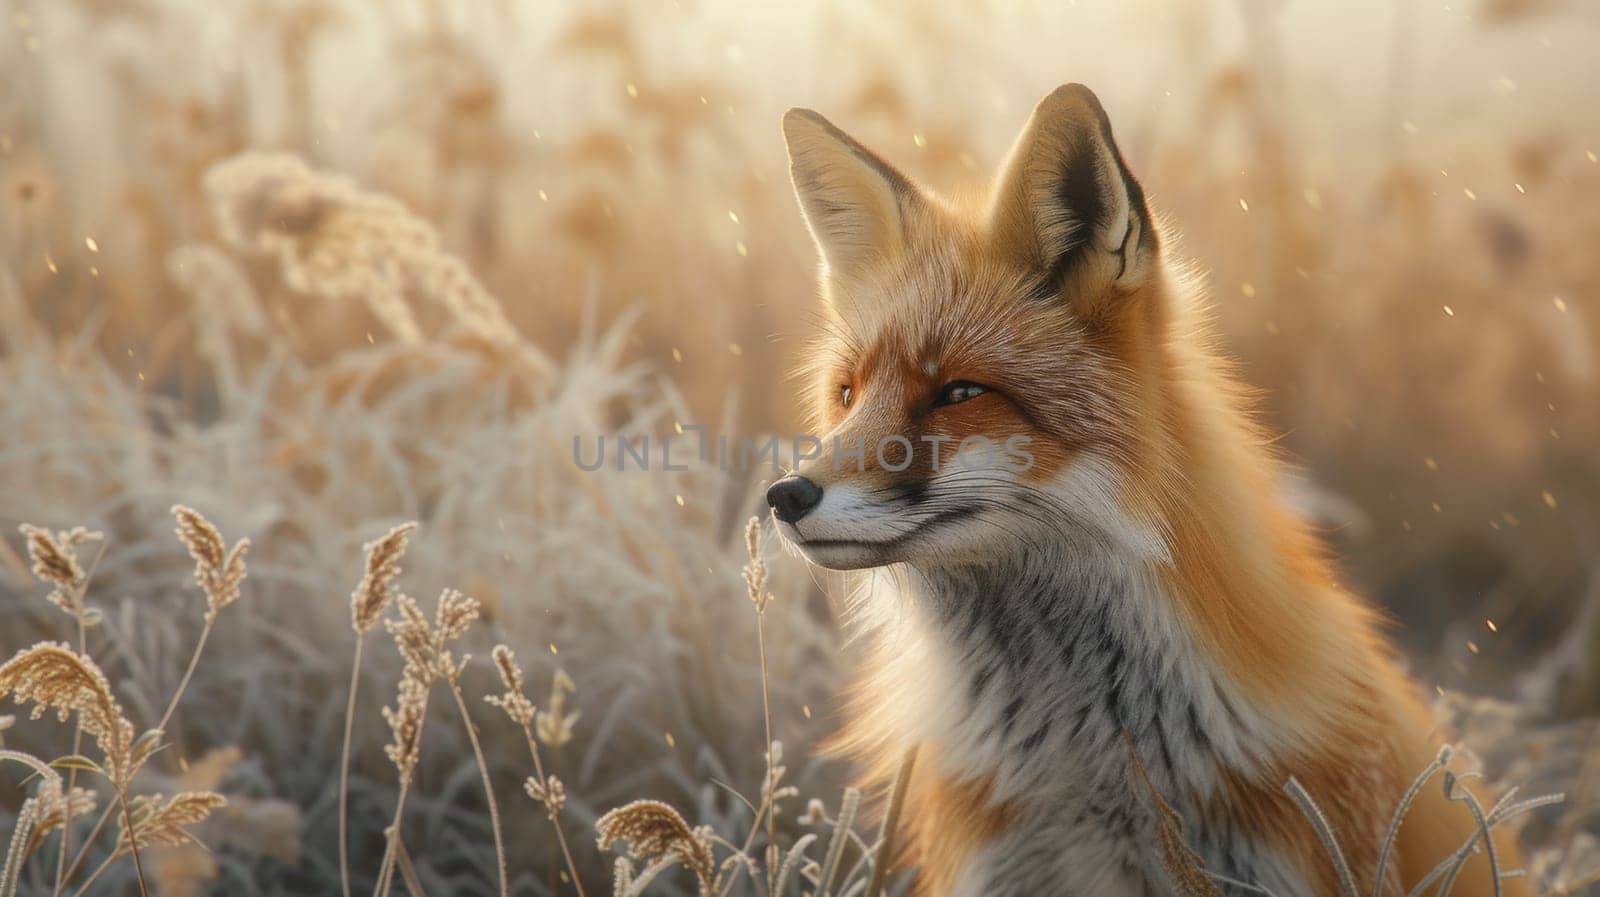 A close up of a fox in the grass with some flowers, AI by starush